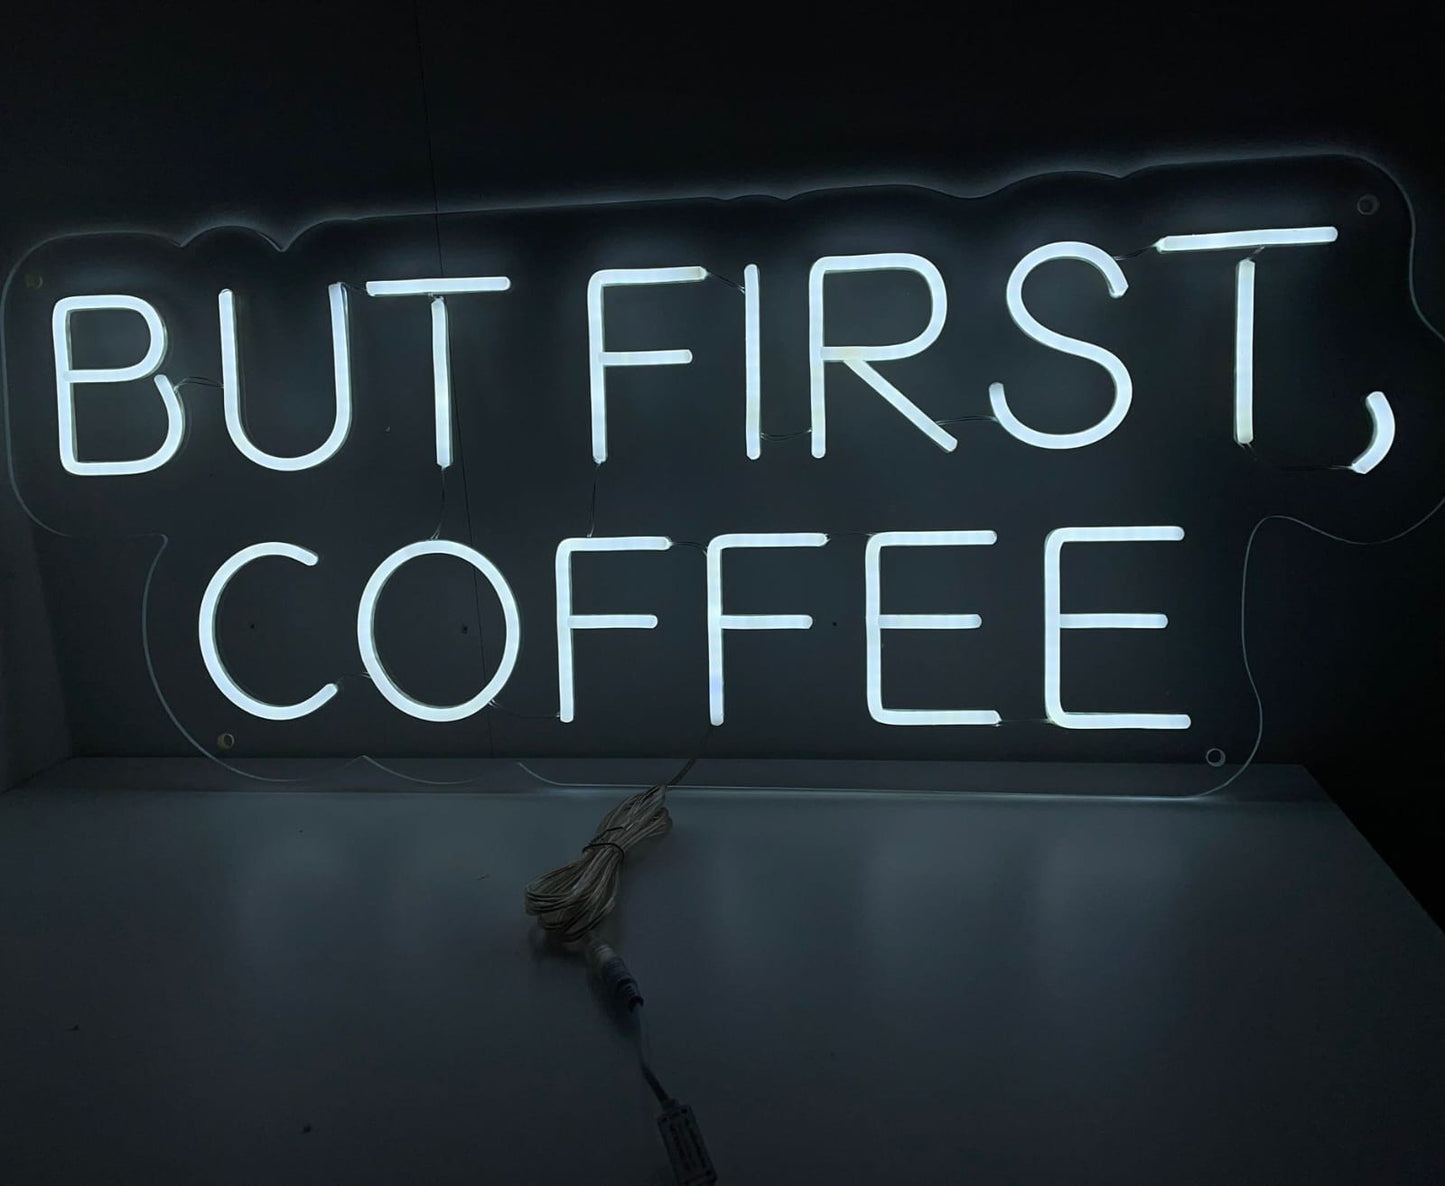 But First, Coffee Neon bord